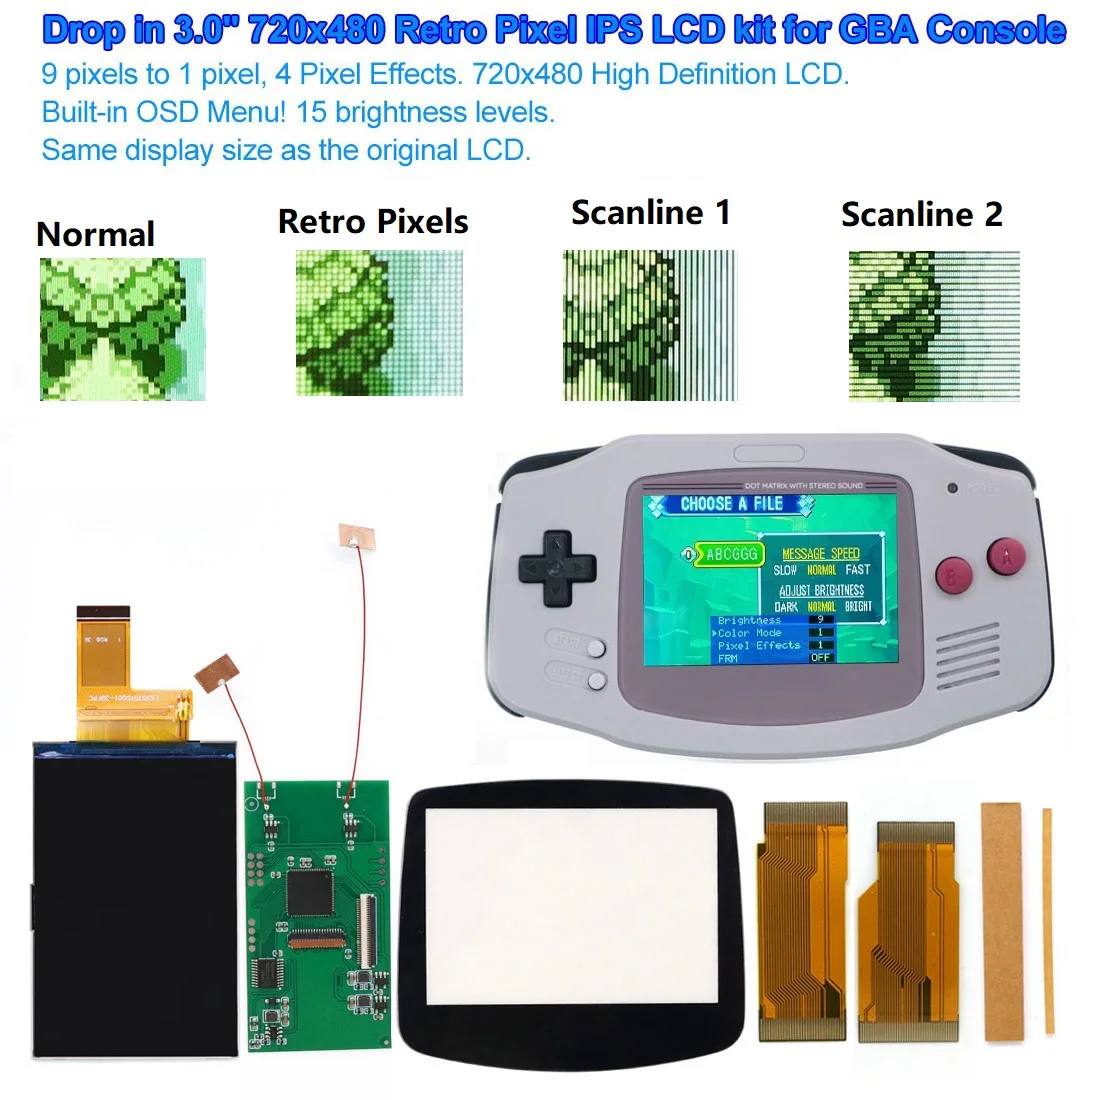 

Easy Install V5 Drop In GBA 3.0" 720x480 Retro pixel IPS LCD For Gameboy ADVANCE For GBA No Need to Cuting Shell